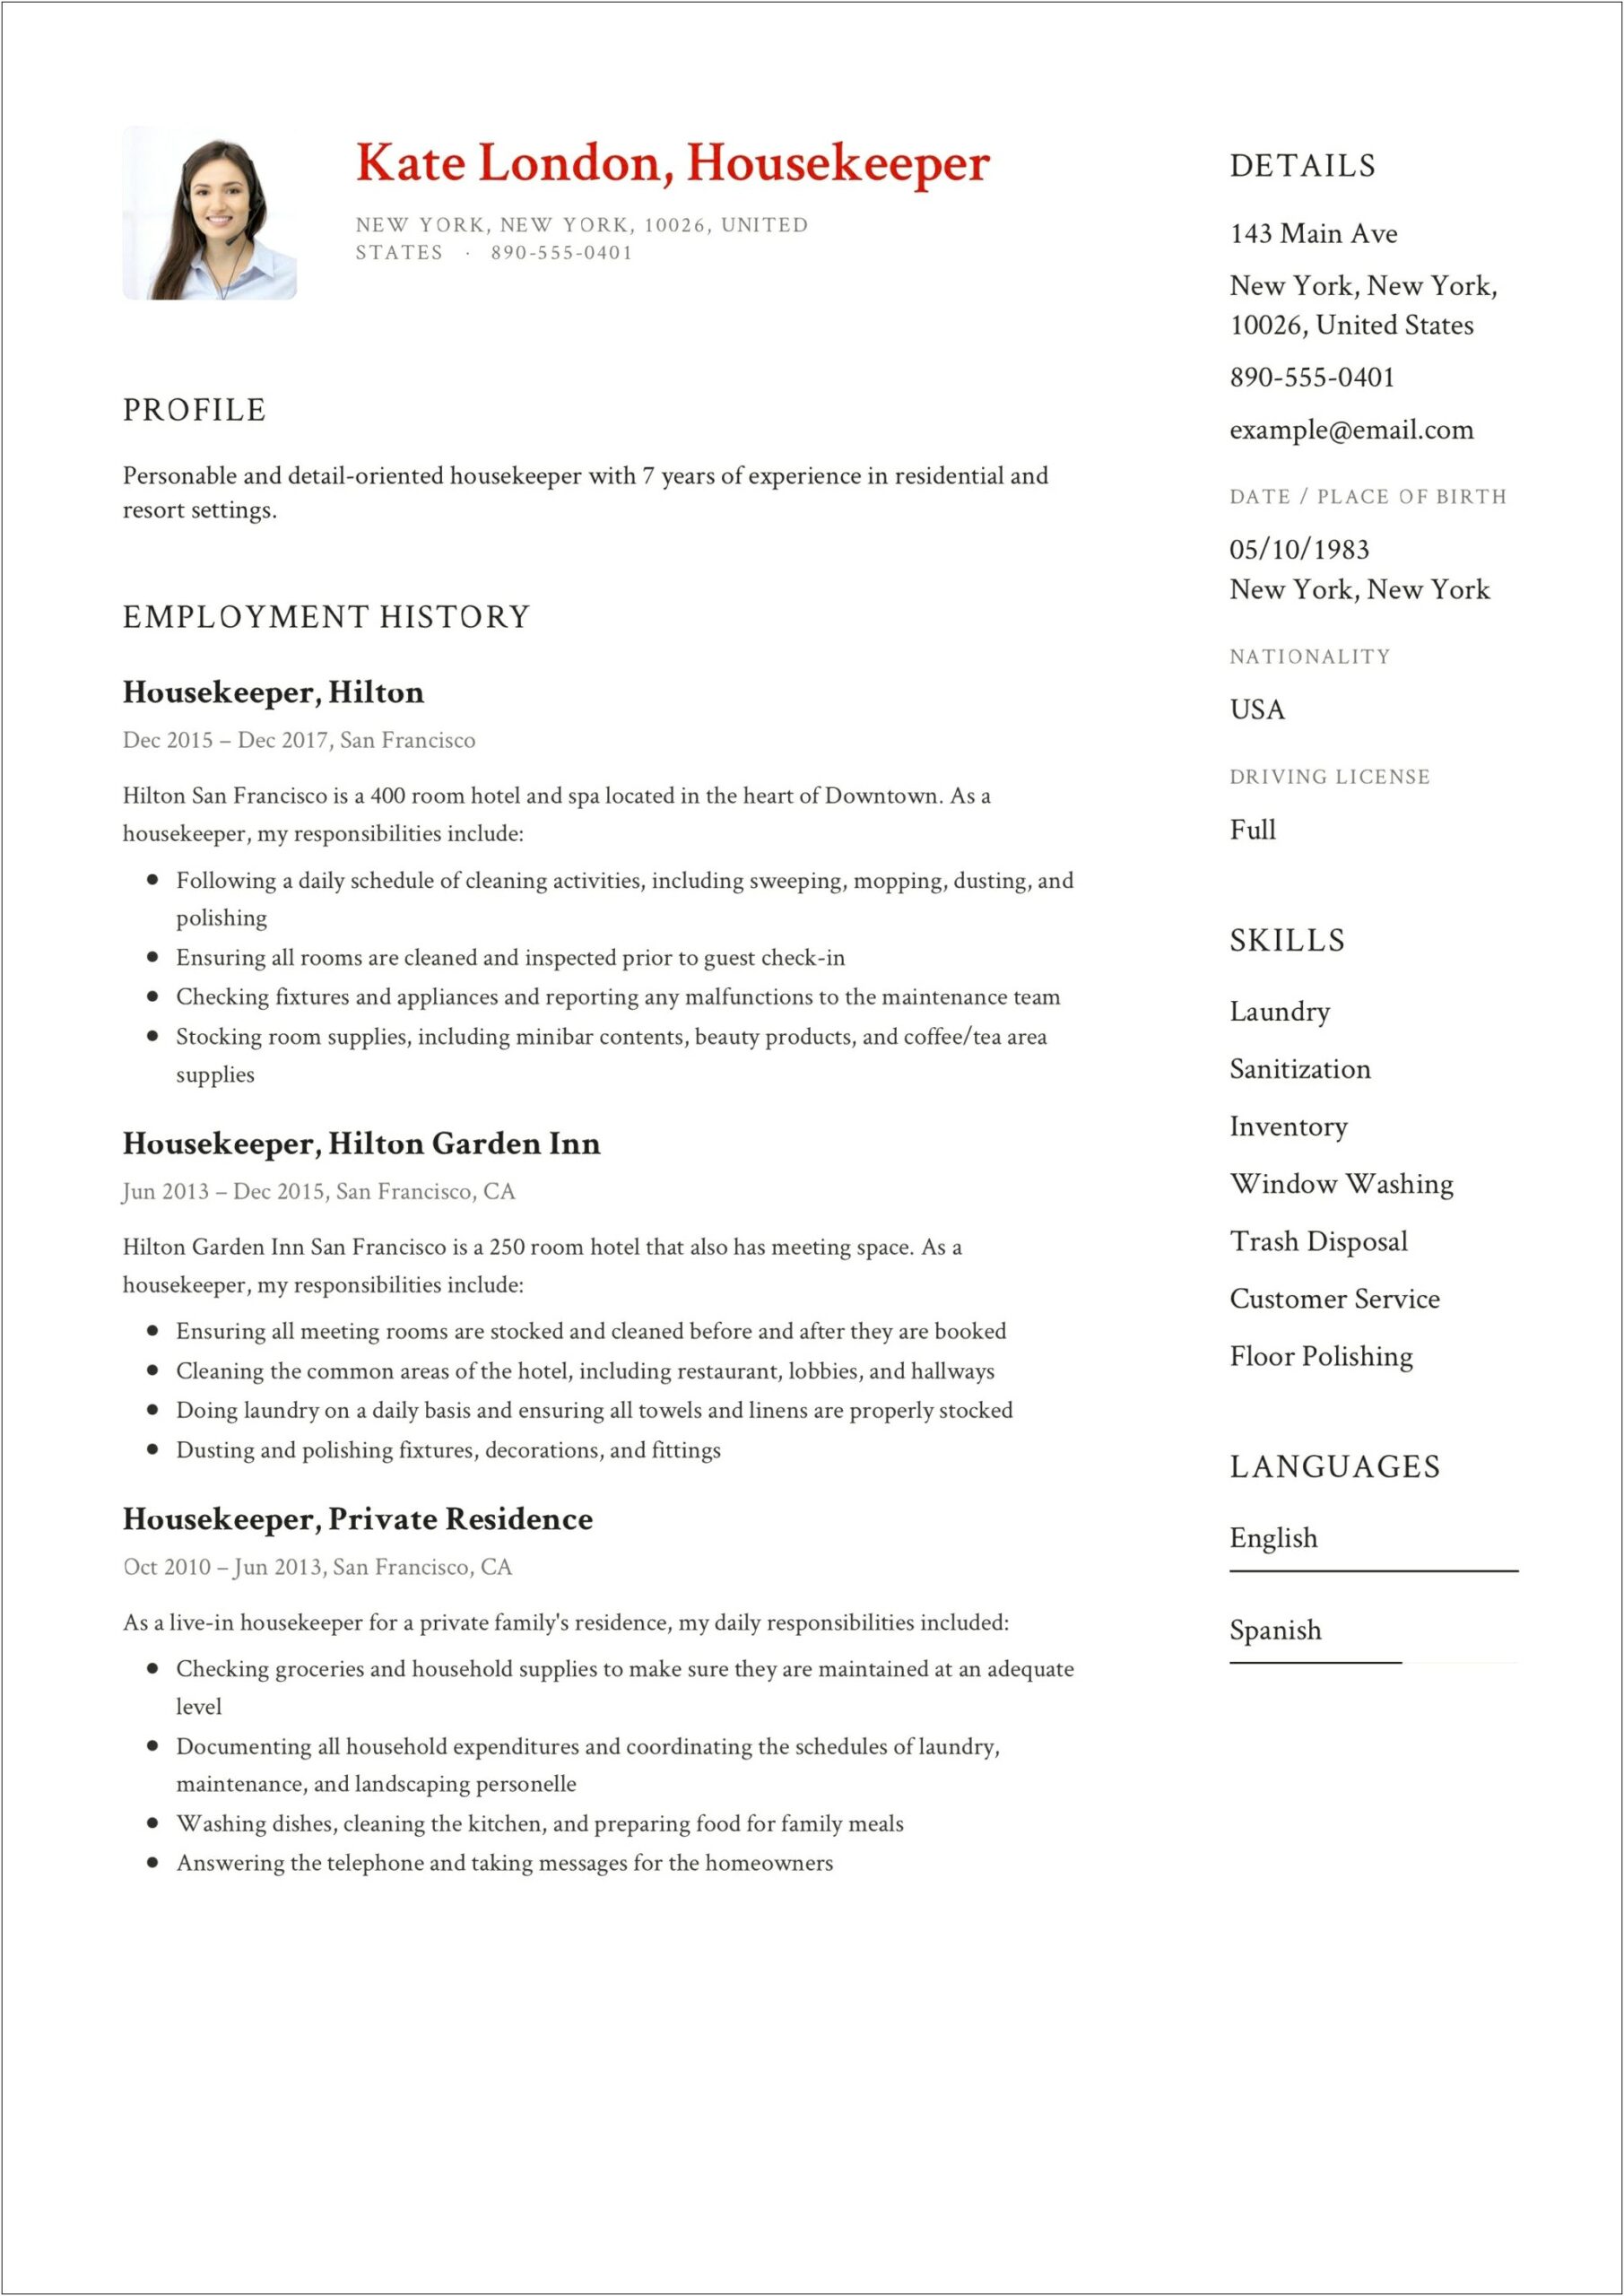 Live In Houskeeper Resume Object